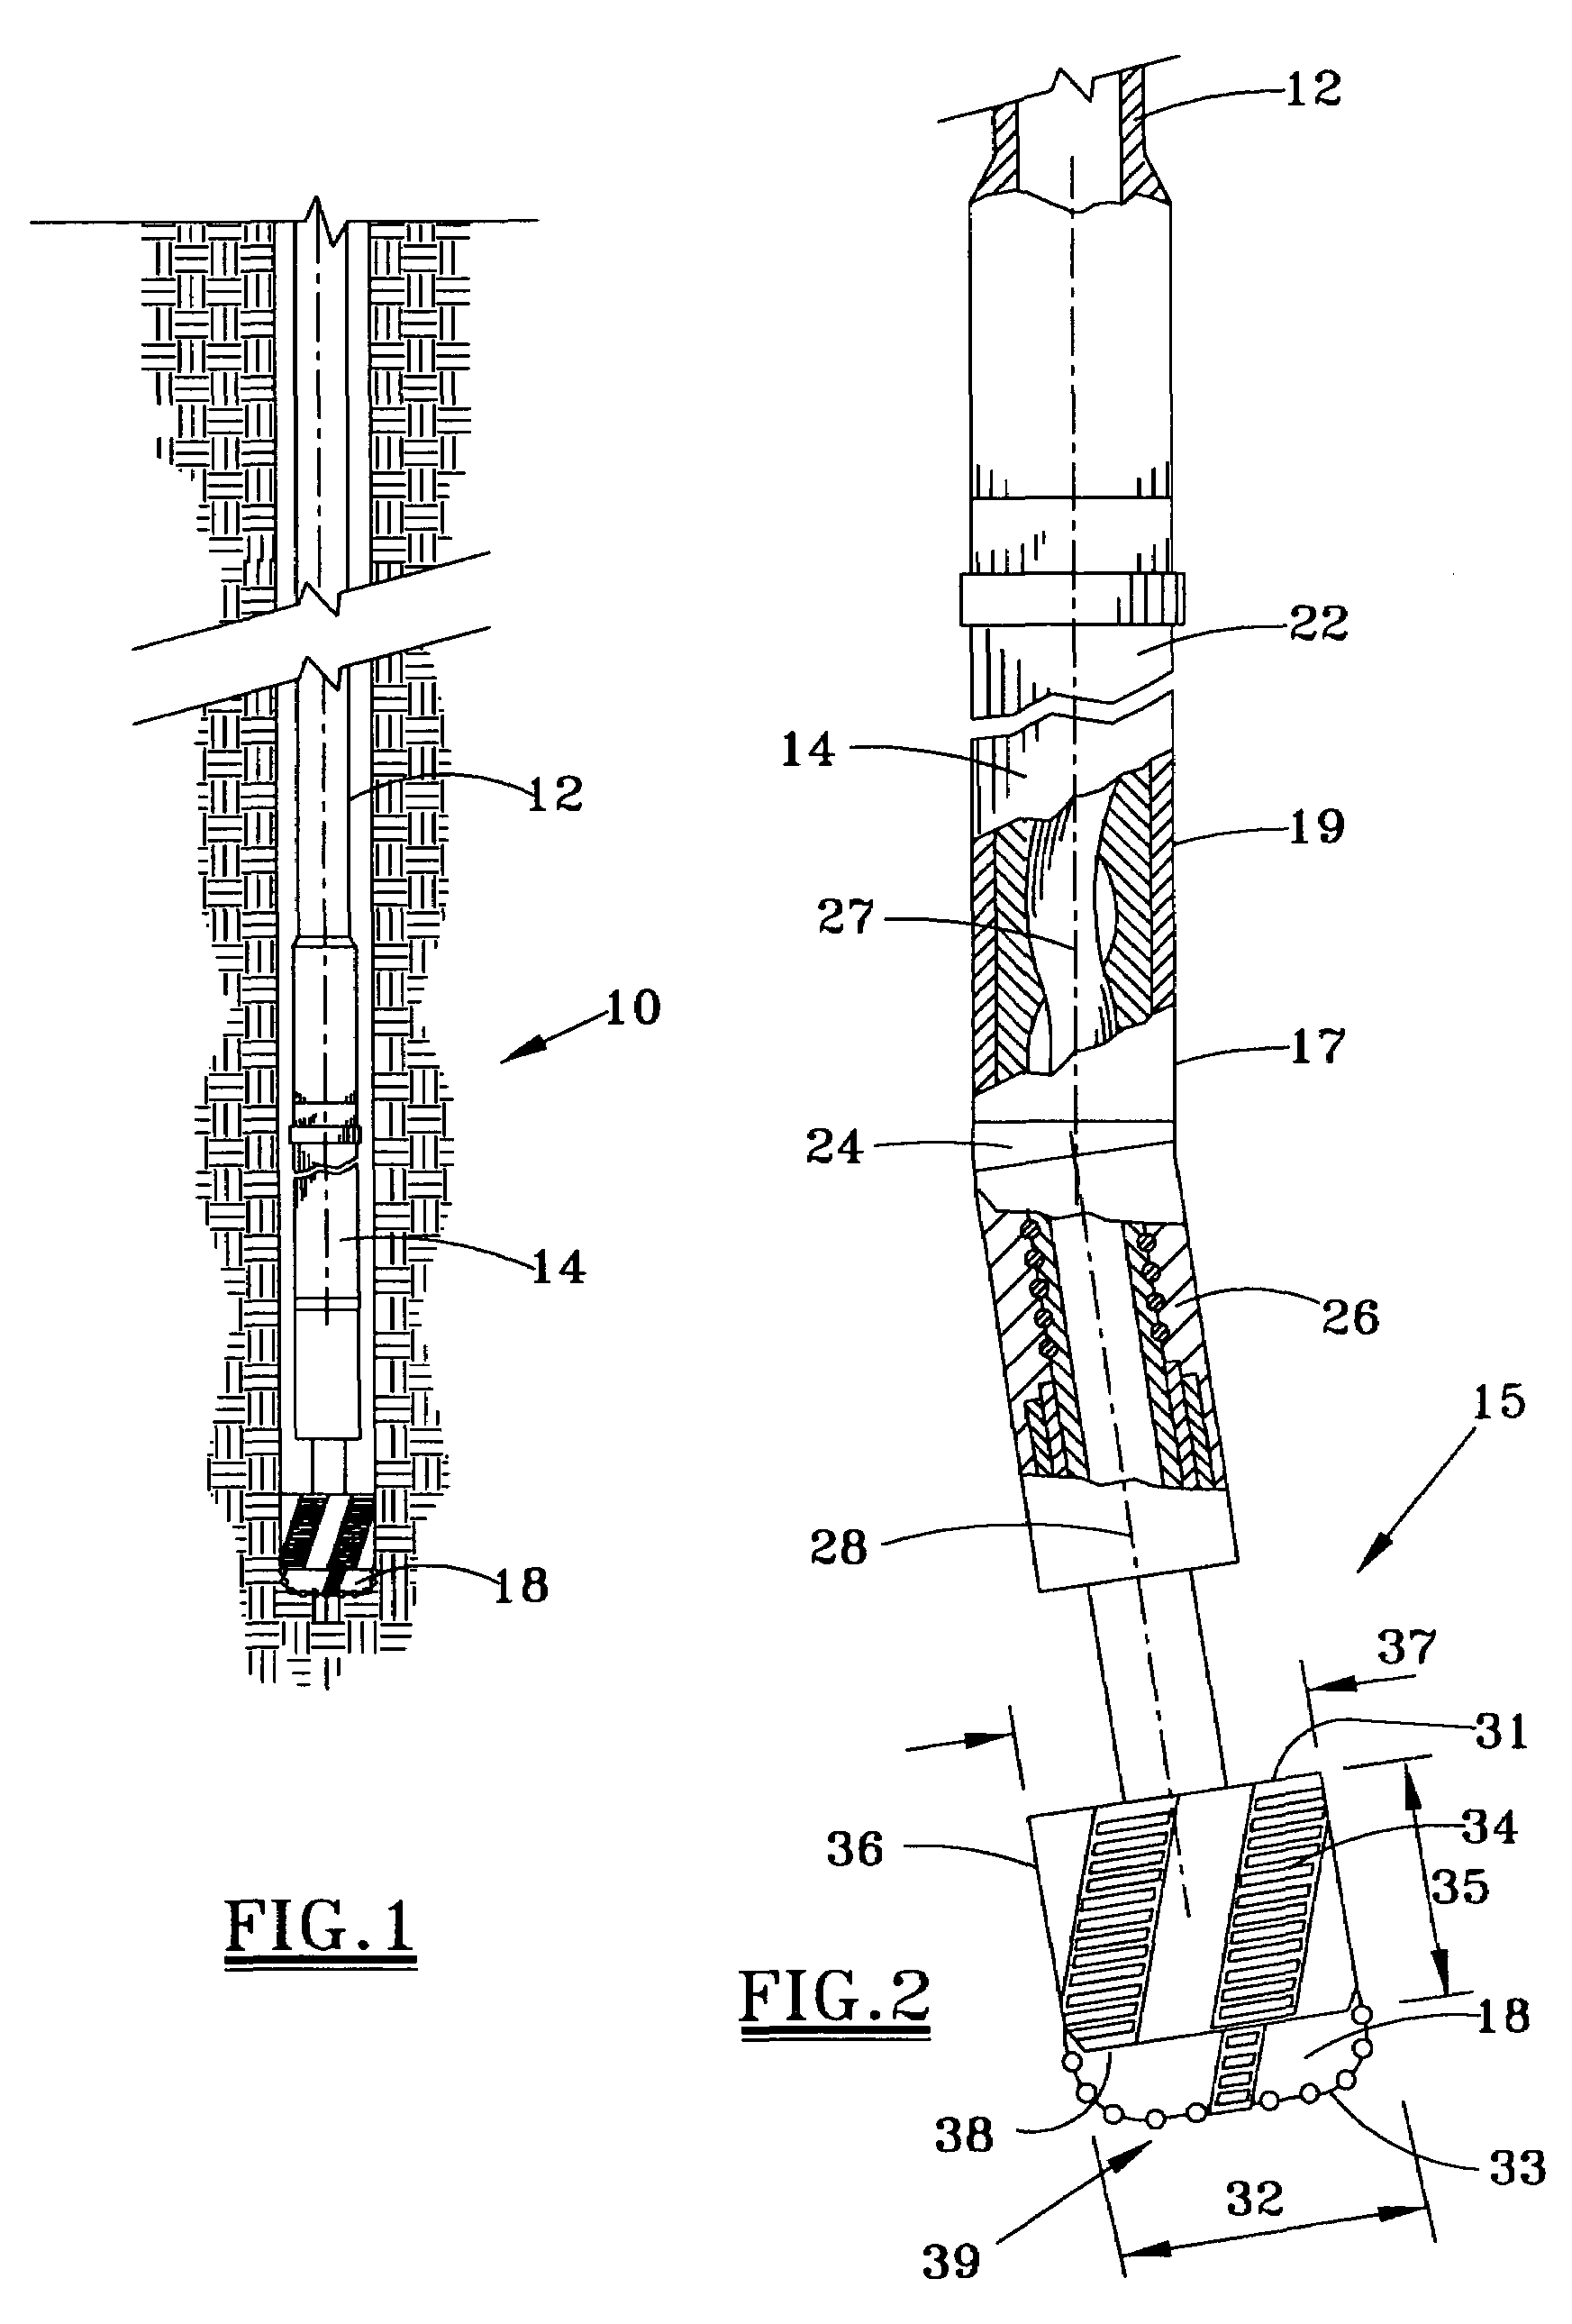 Expanded downhole screen systems and method